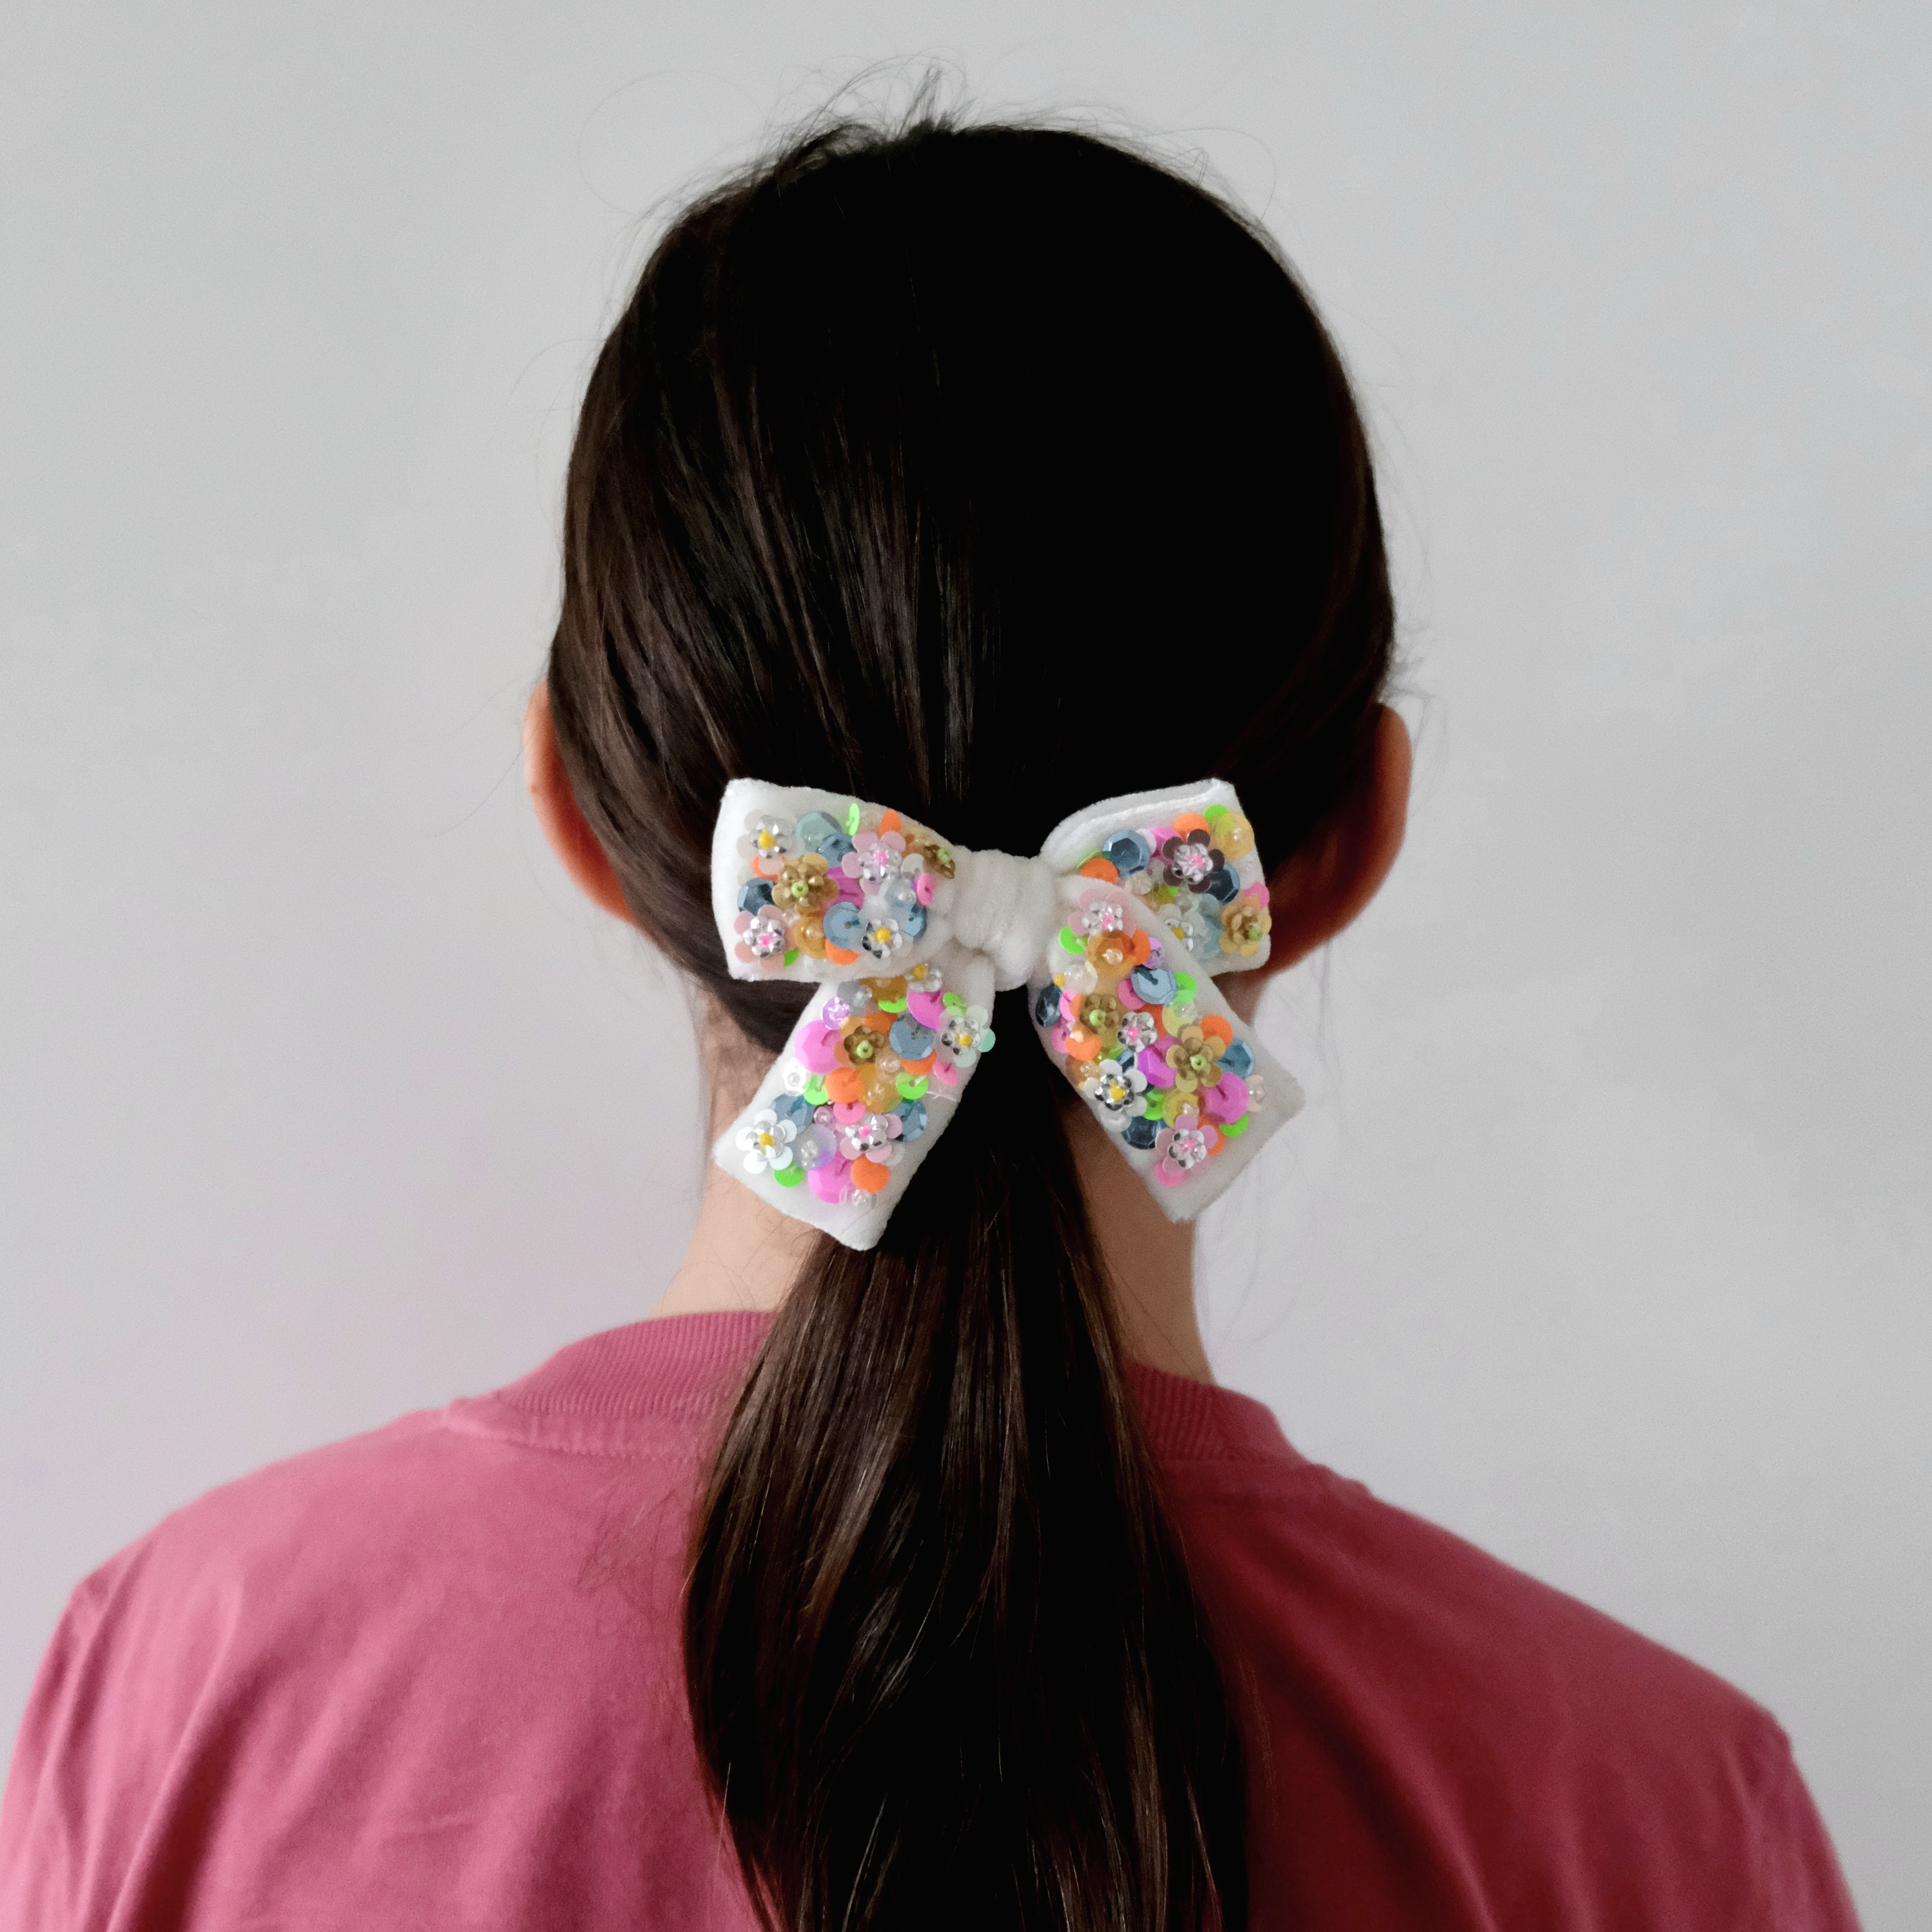 Neon velvet hair bow, in mediums size, worn on  a pony tail.